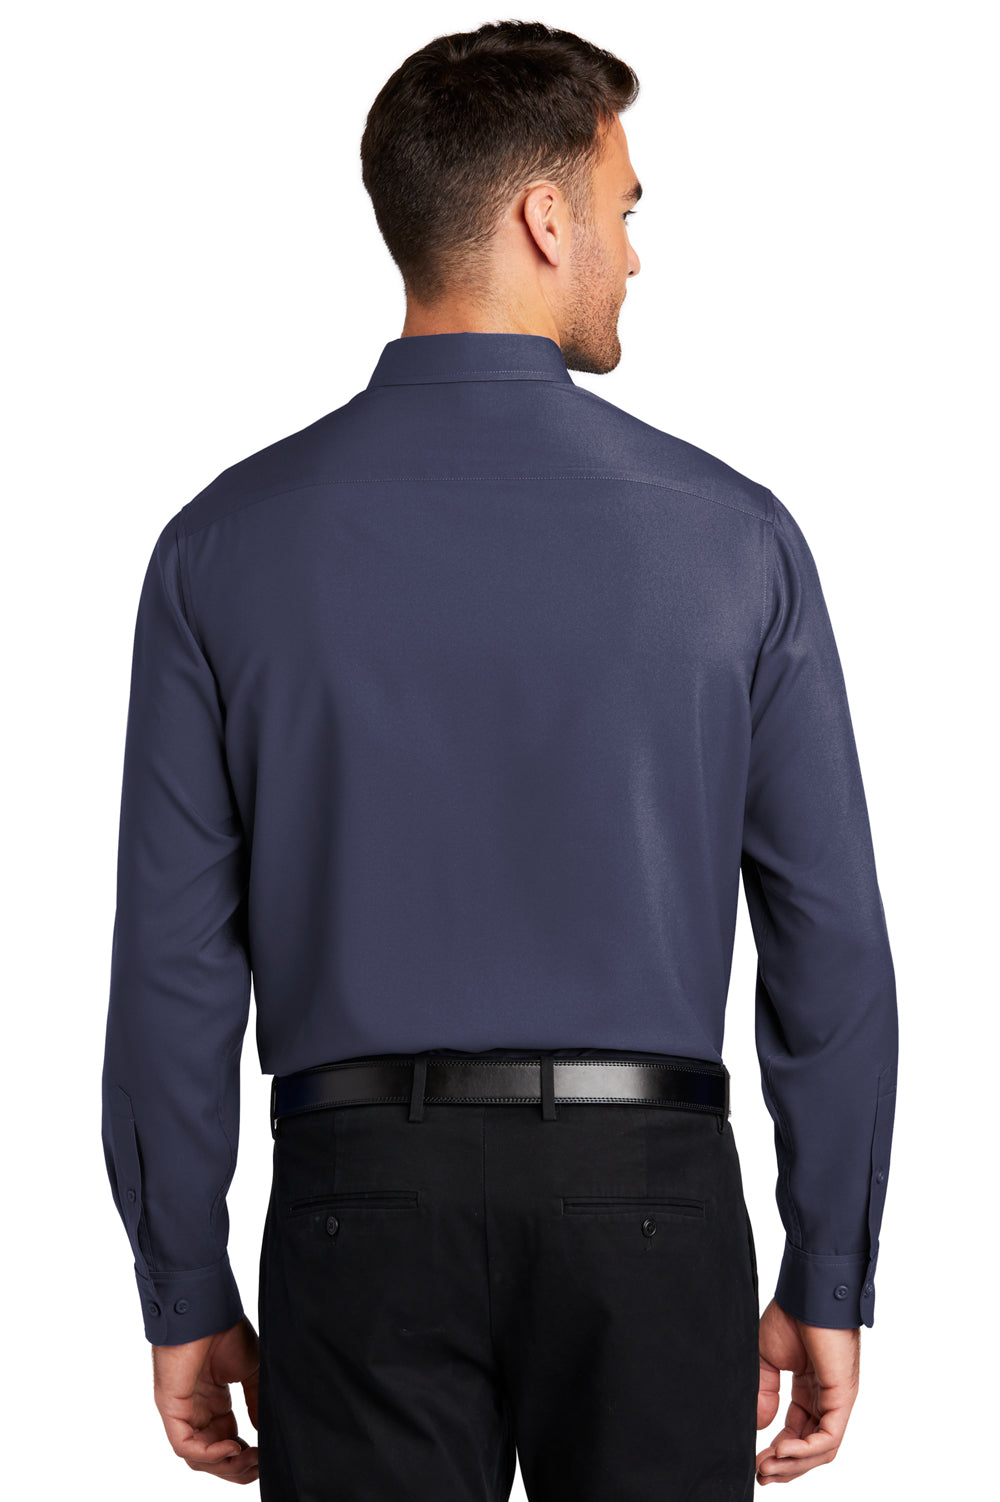 Port Authority Mens Performance Long Sleeve Button Down Shirt w/ Pocket True Navy Blue Side